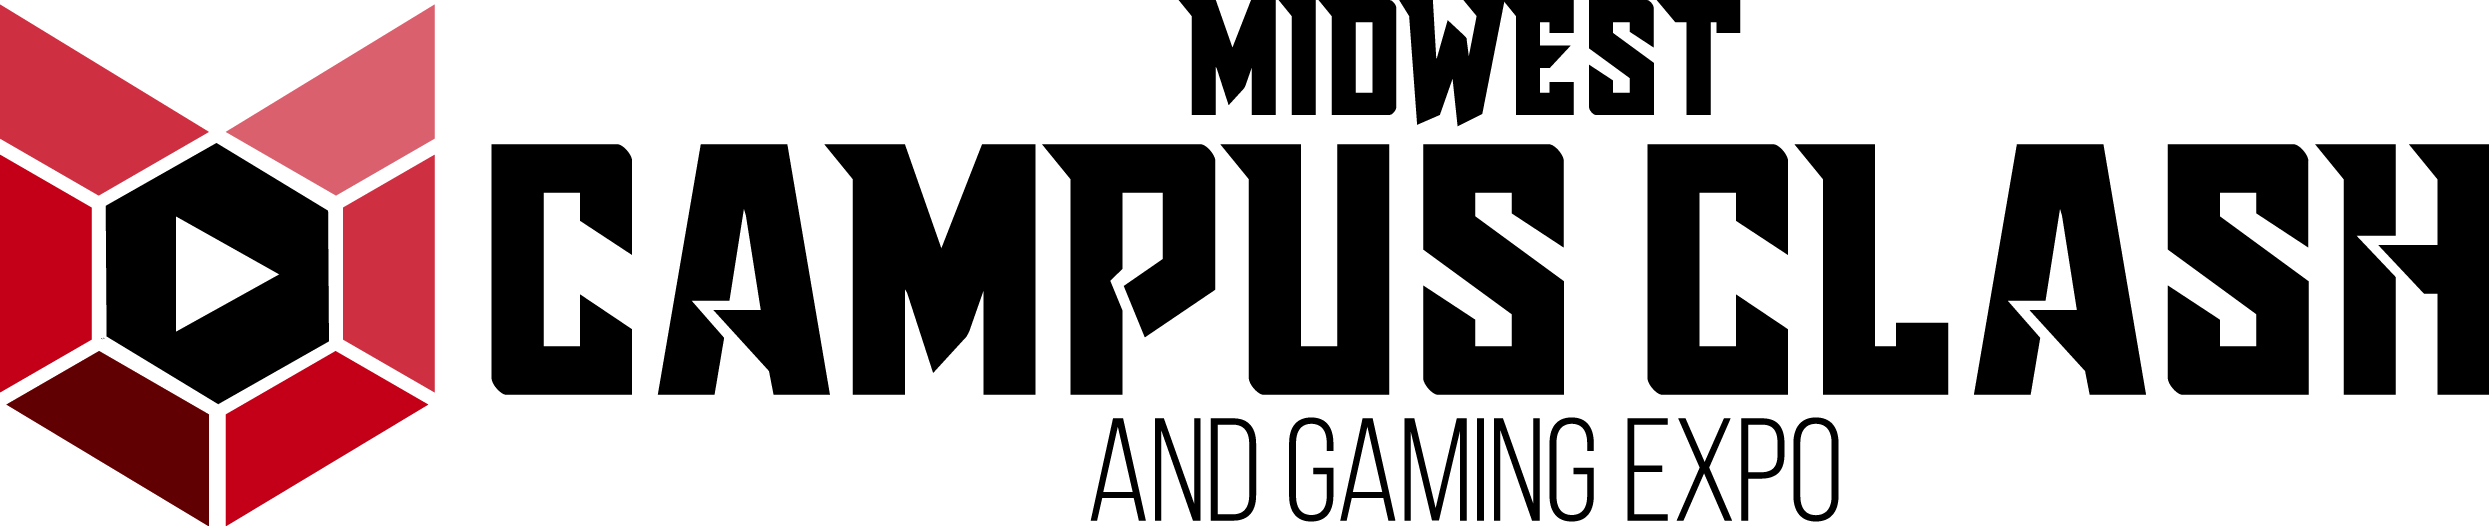 Midwest Campus Clash and Gaming Expo